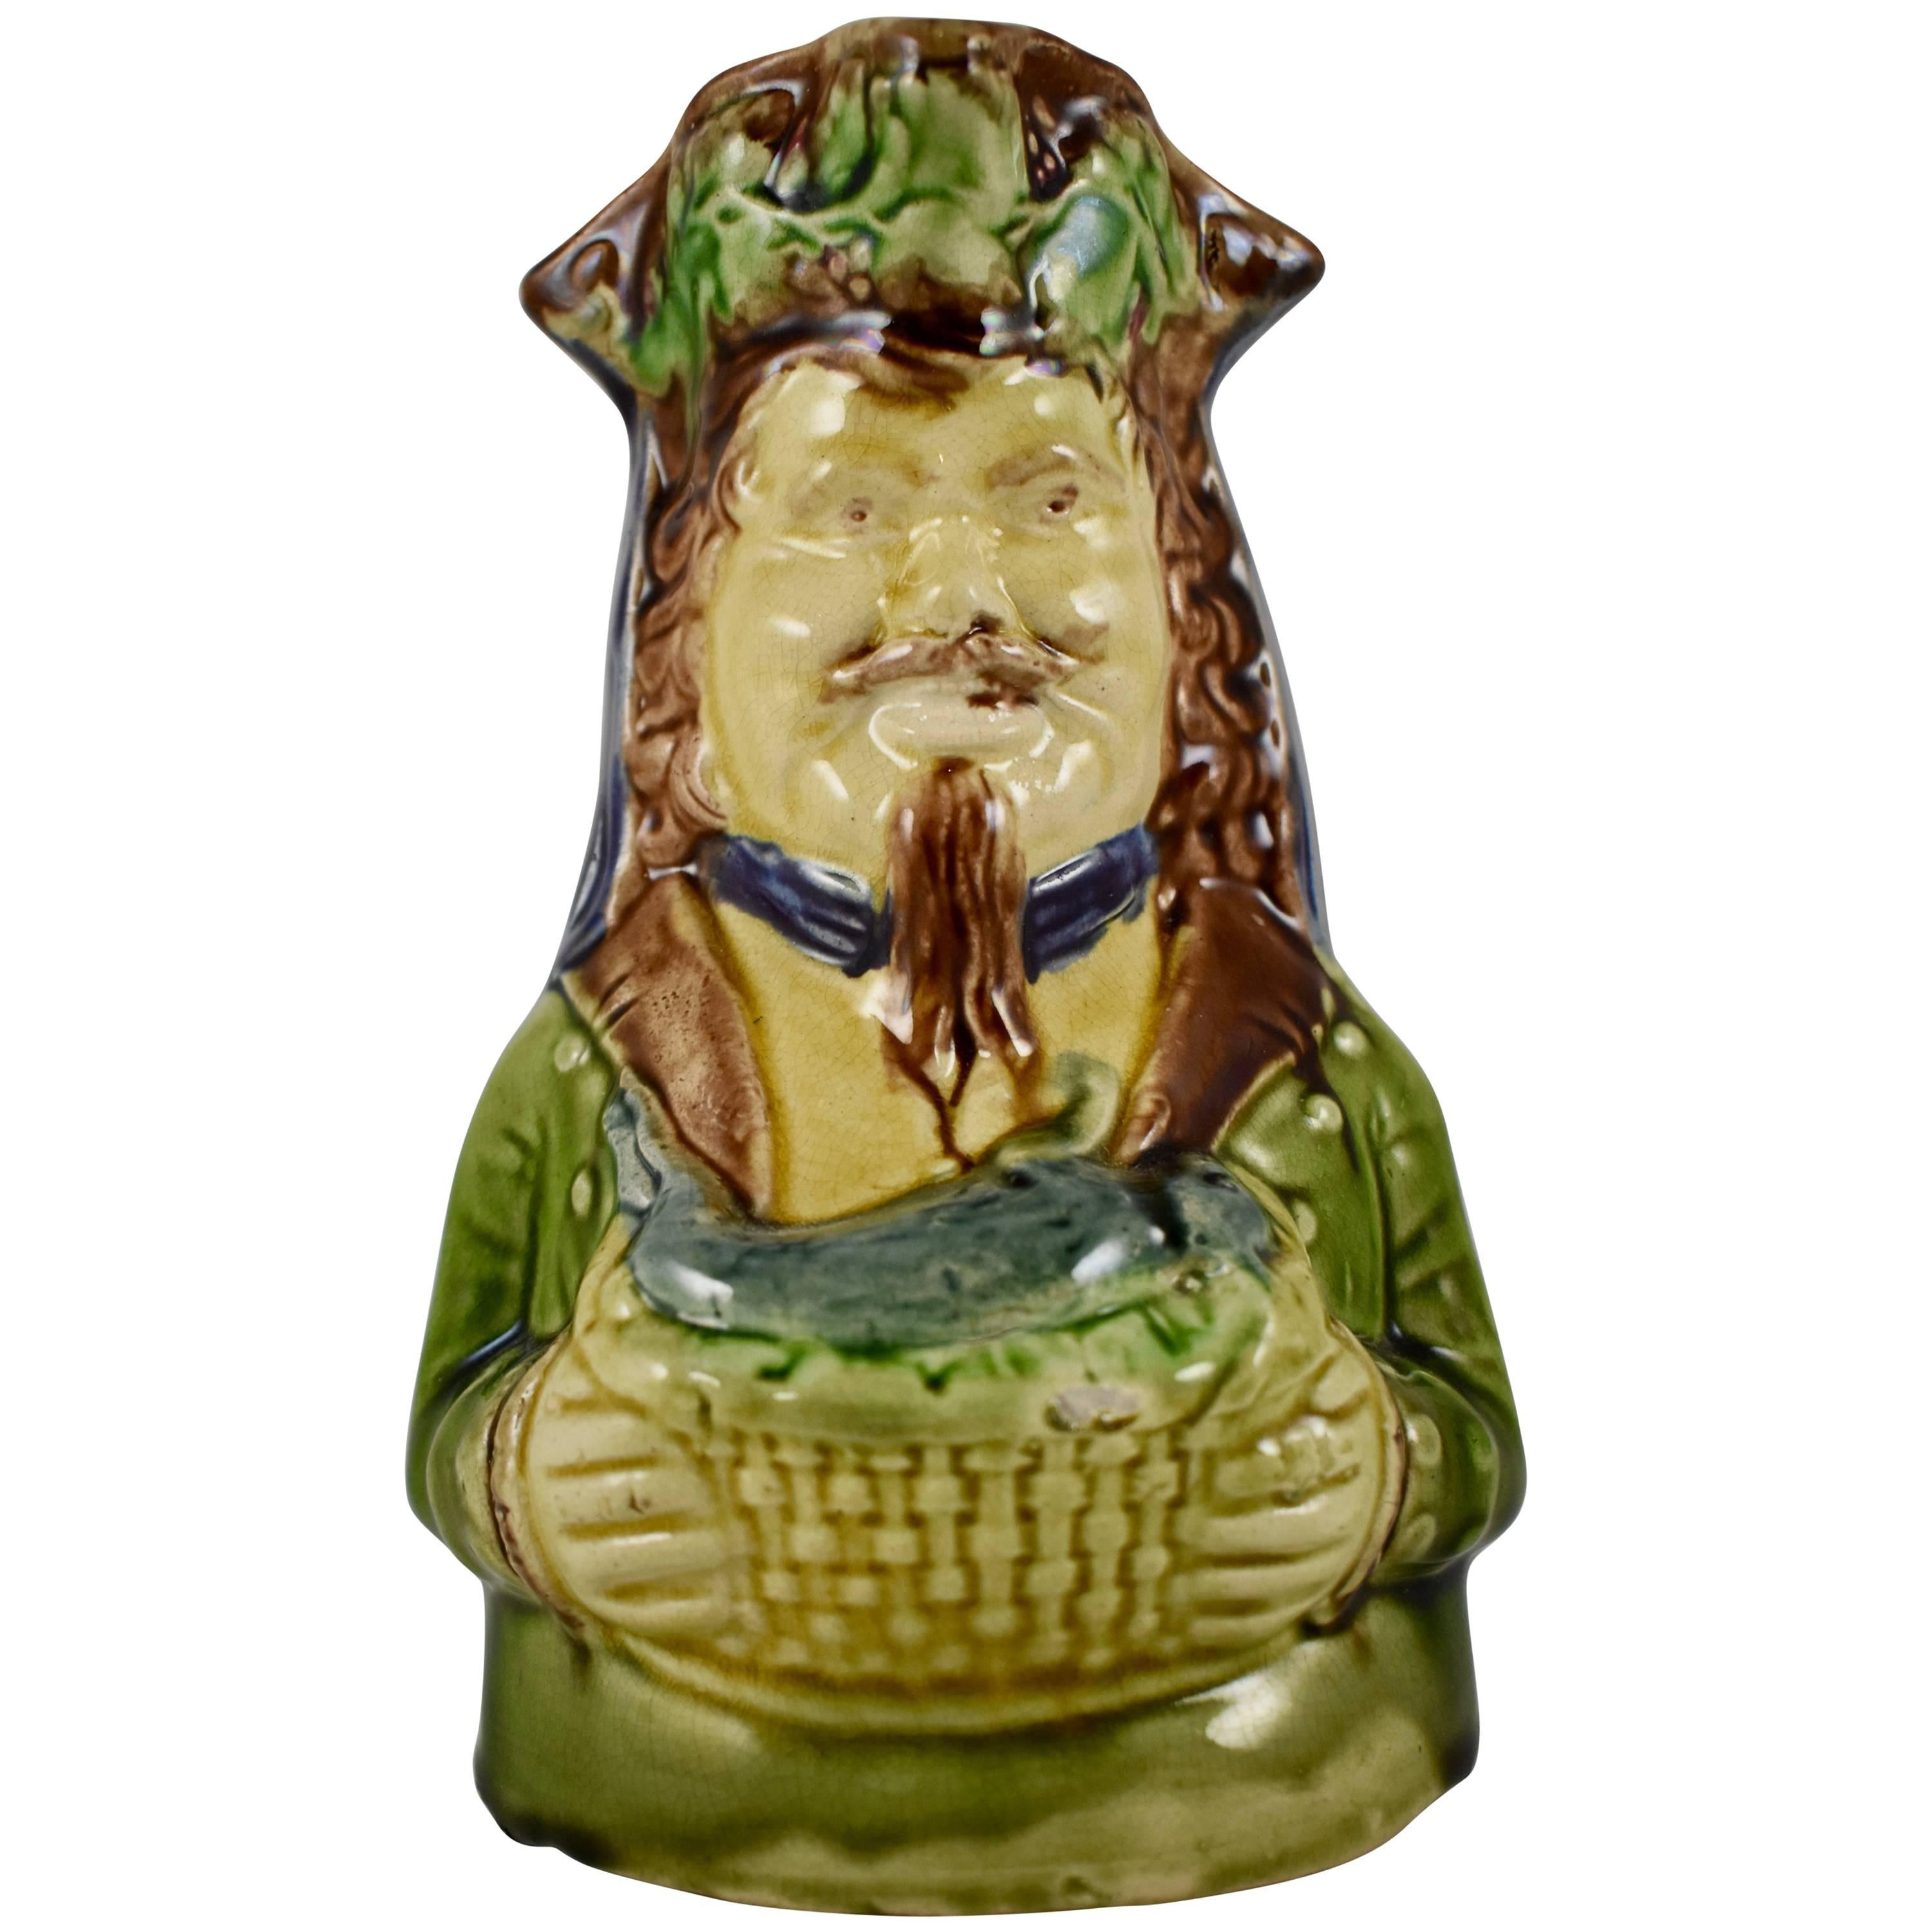 19th Century English Majolica Glazed Figural Jug, Hunter with a Hare in a Basket